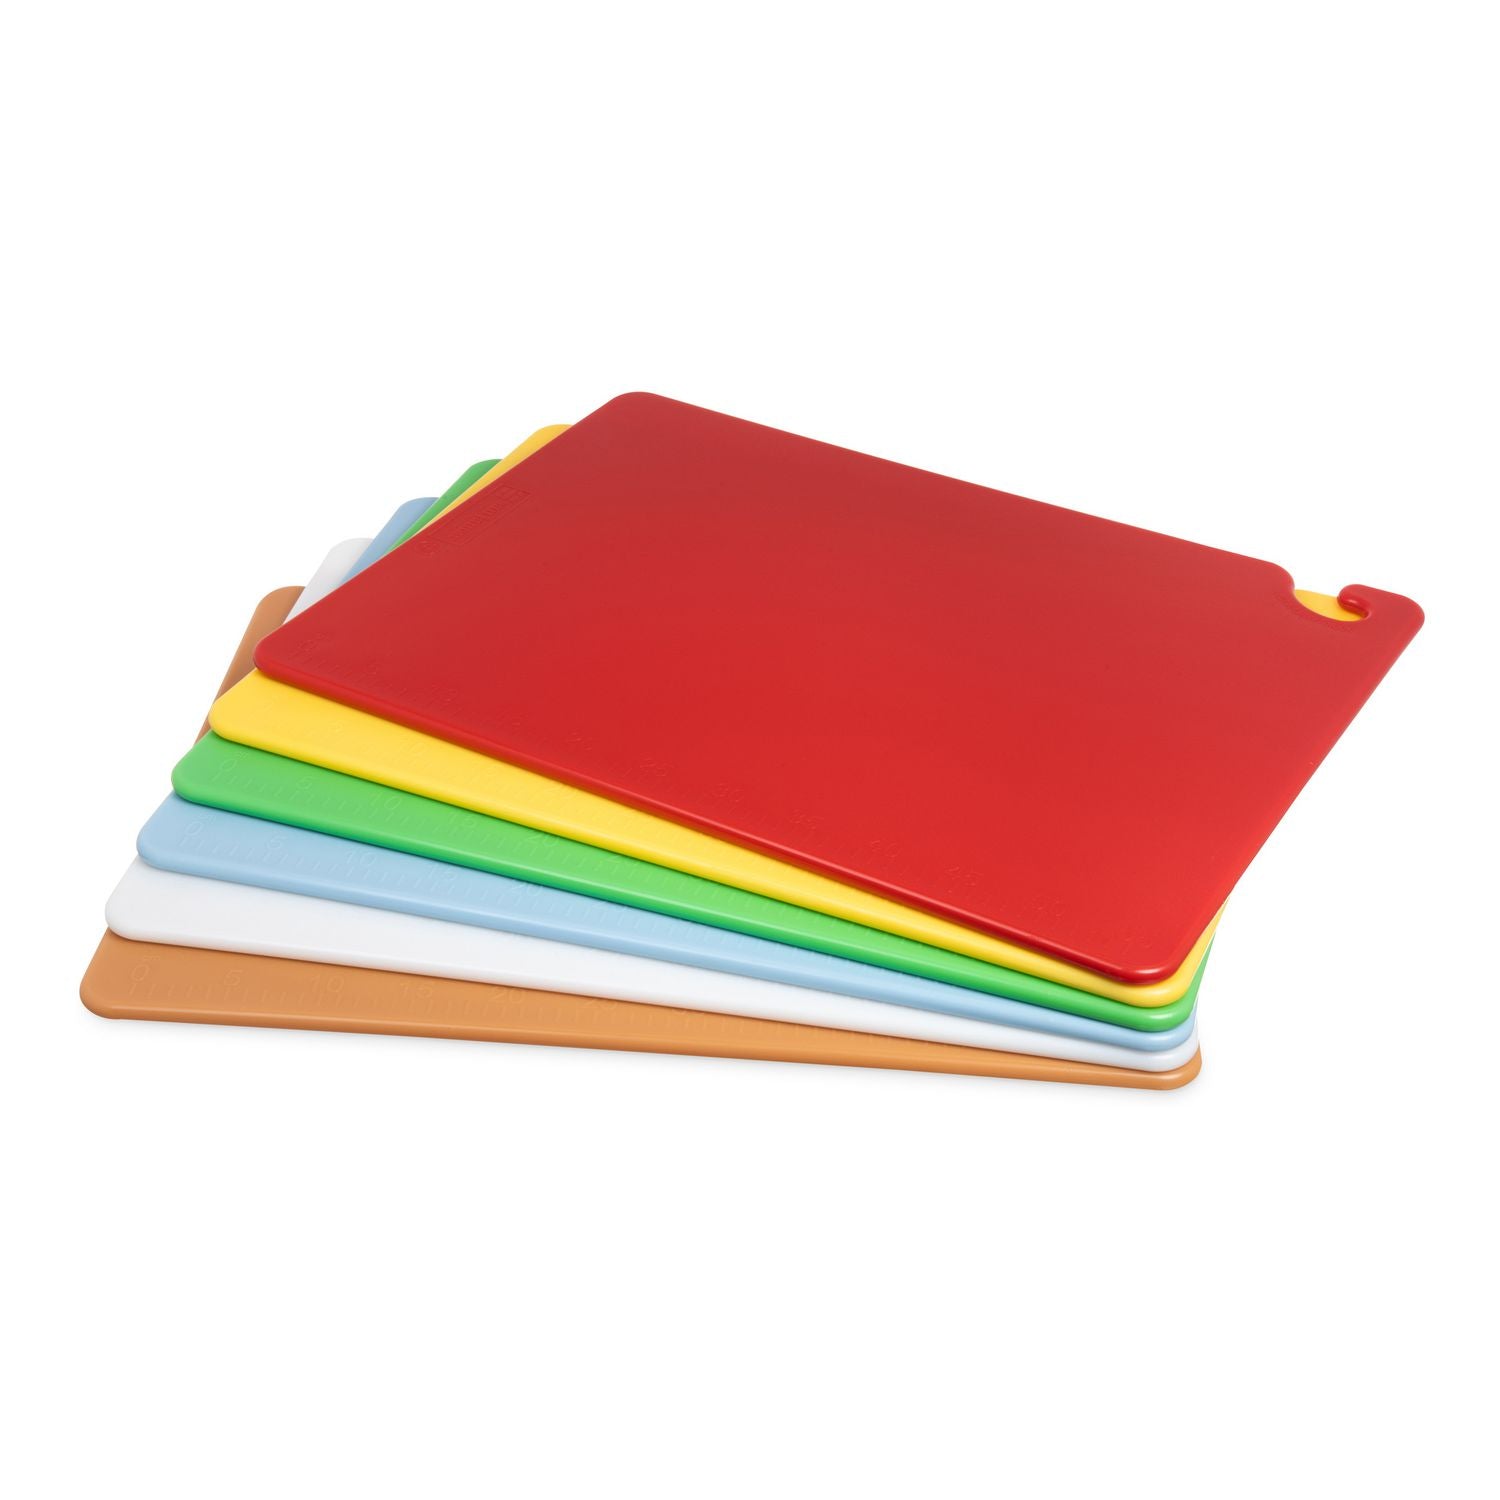 cut-n-carry-color-cutting-board-with-molded-in-ruler-assorted-colors-6-pack_sjmcb1824kc - 1